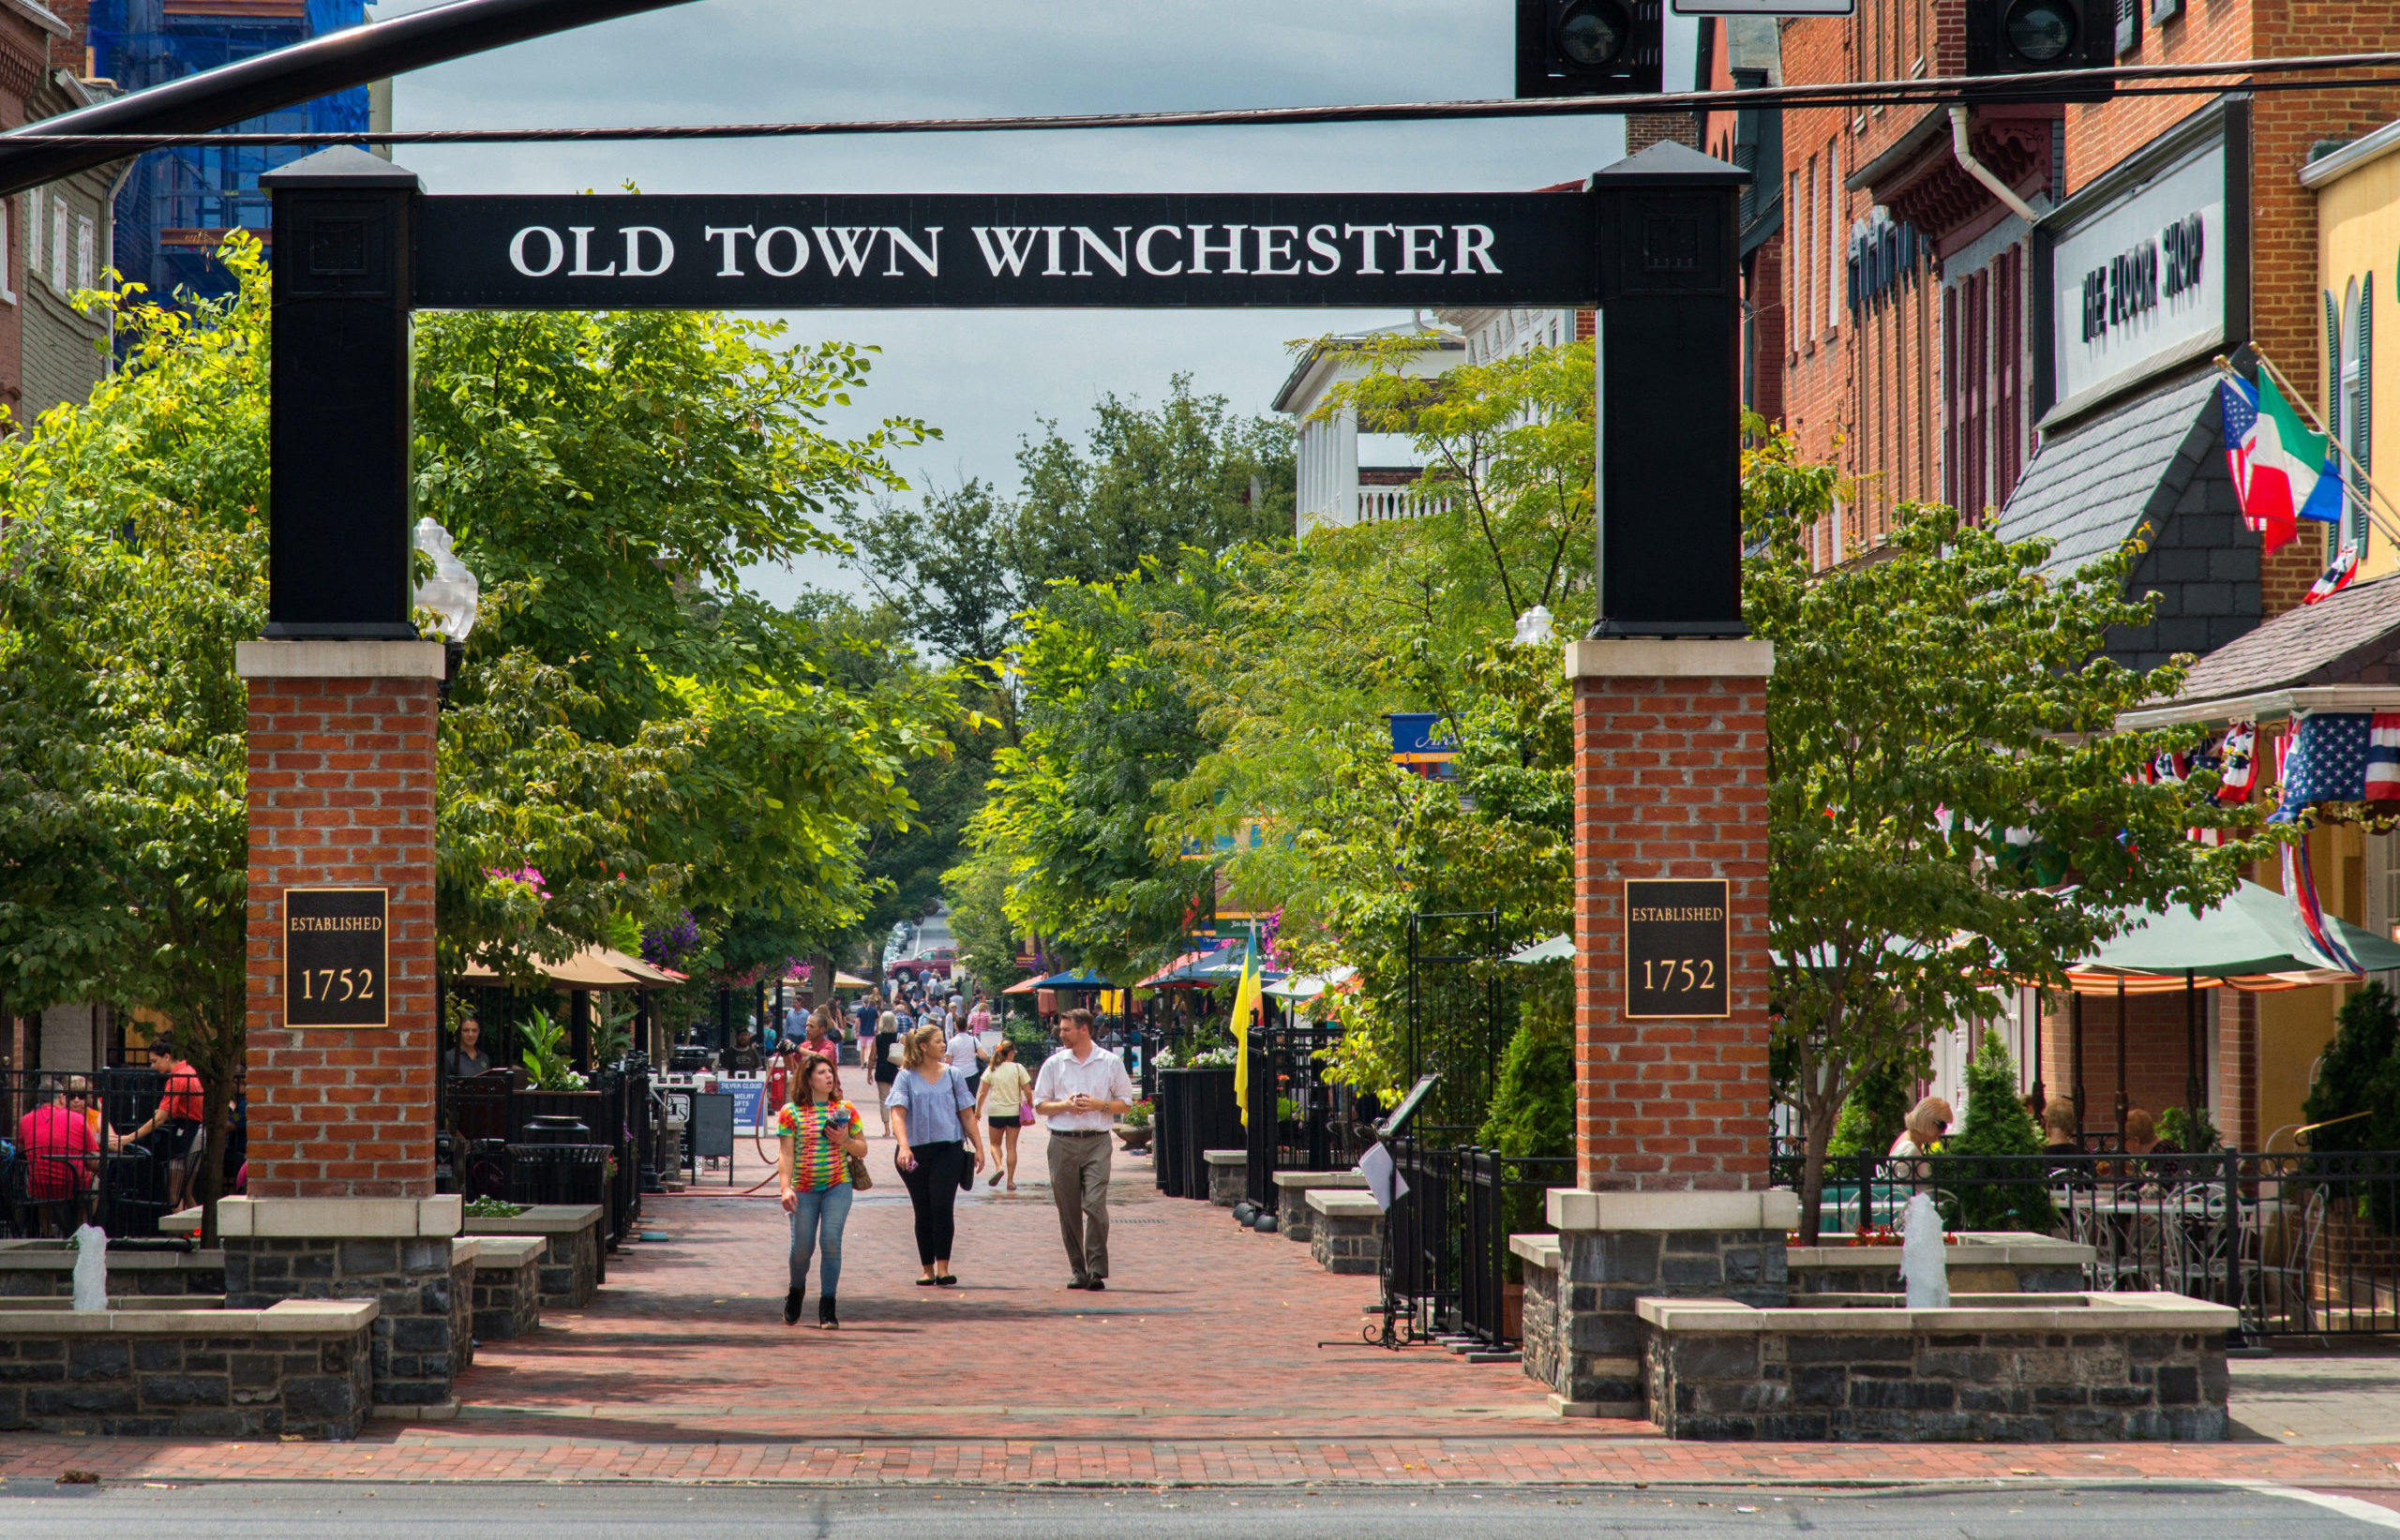 Old Town Winchester by Robert Harris (@robertharris) and courtesy of Virginia Tourism Corporation.